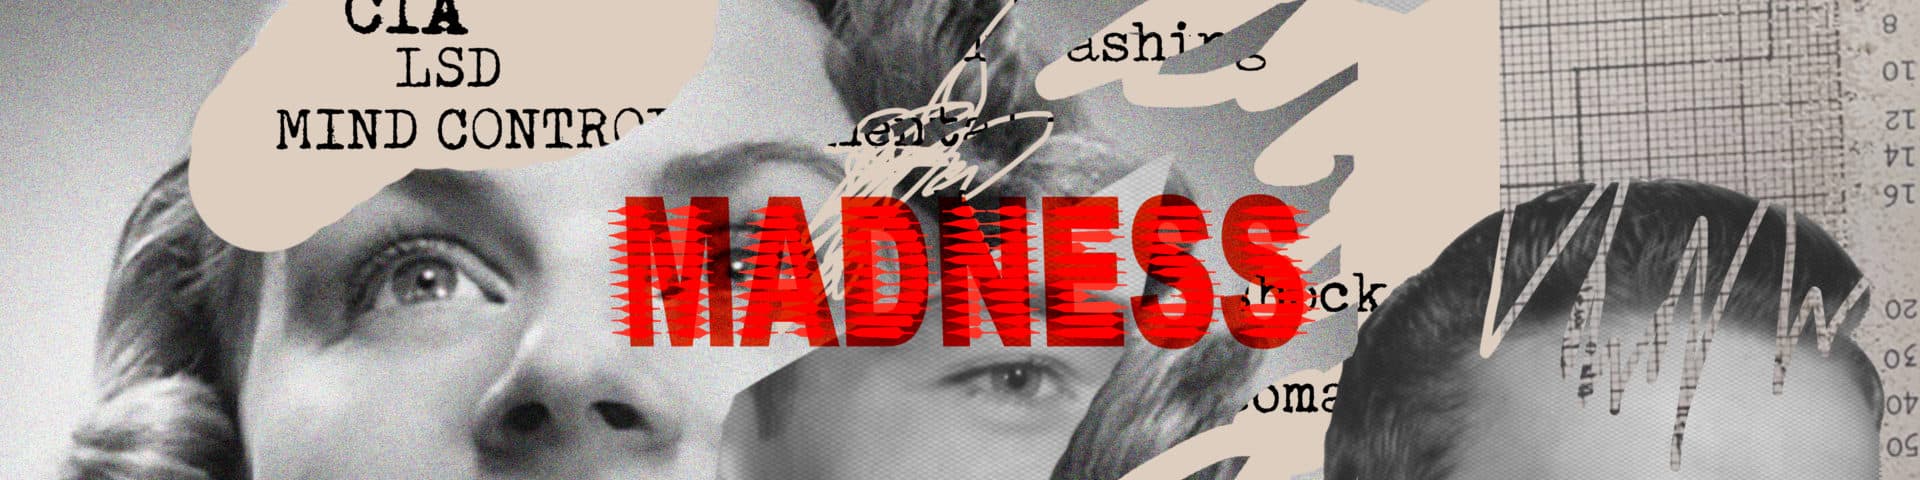 &quot;Madness,&quot; a new series from Endless Thread, will drop later this Spring (featured art by Mary Banas)